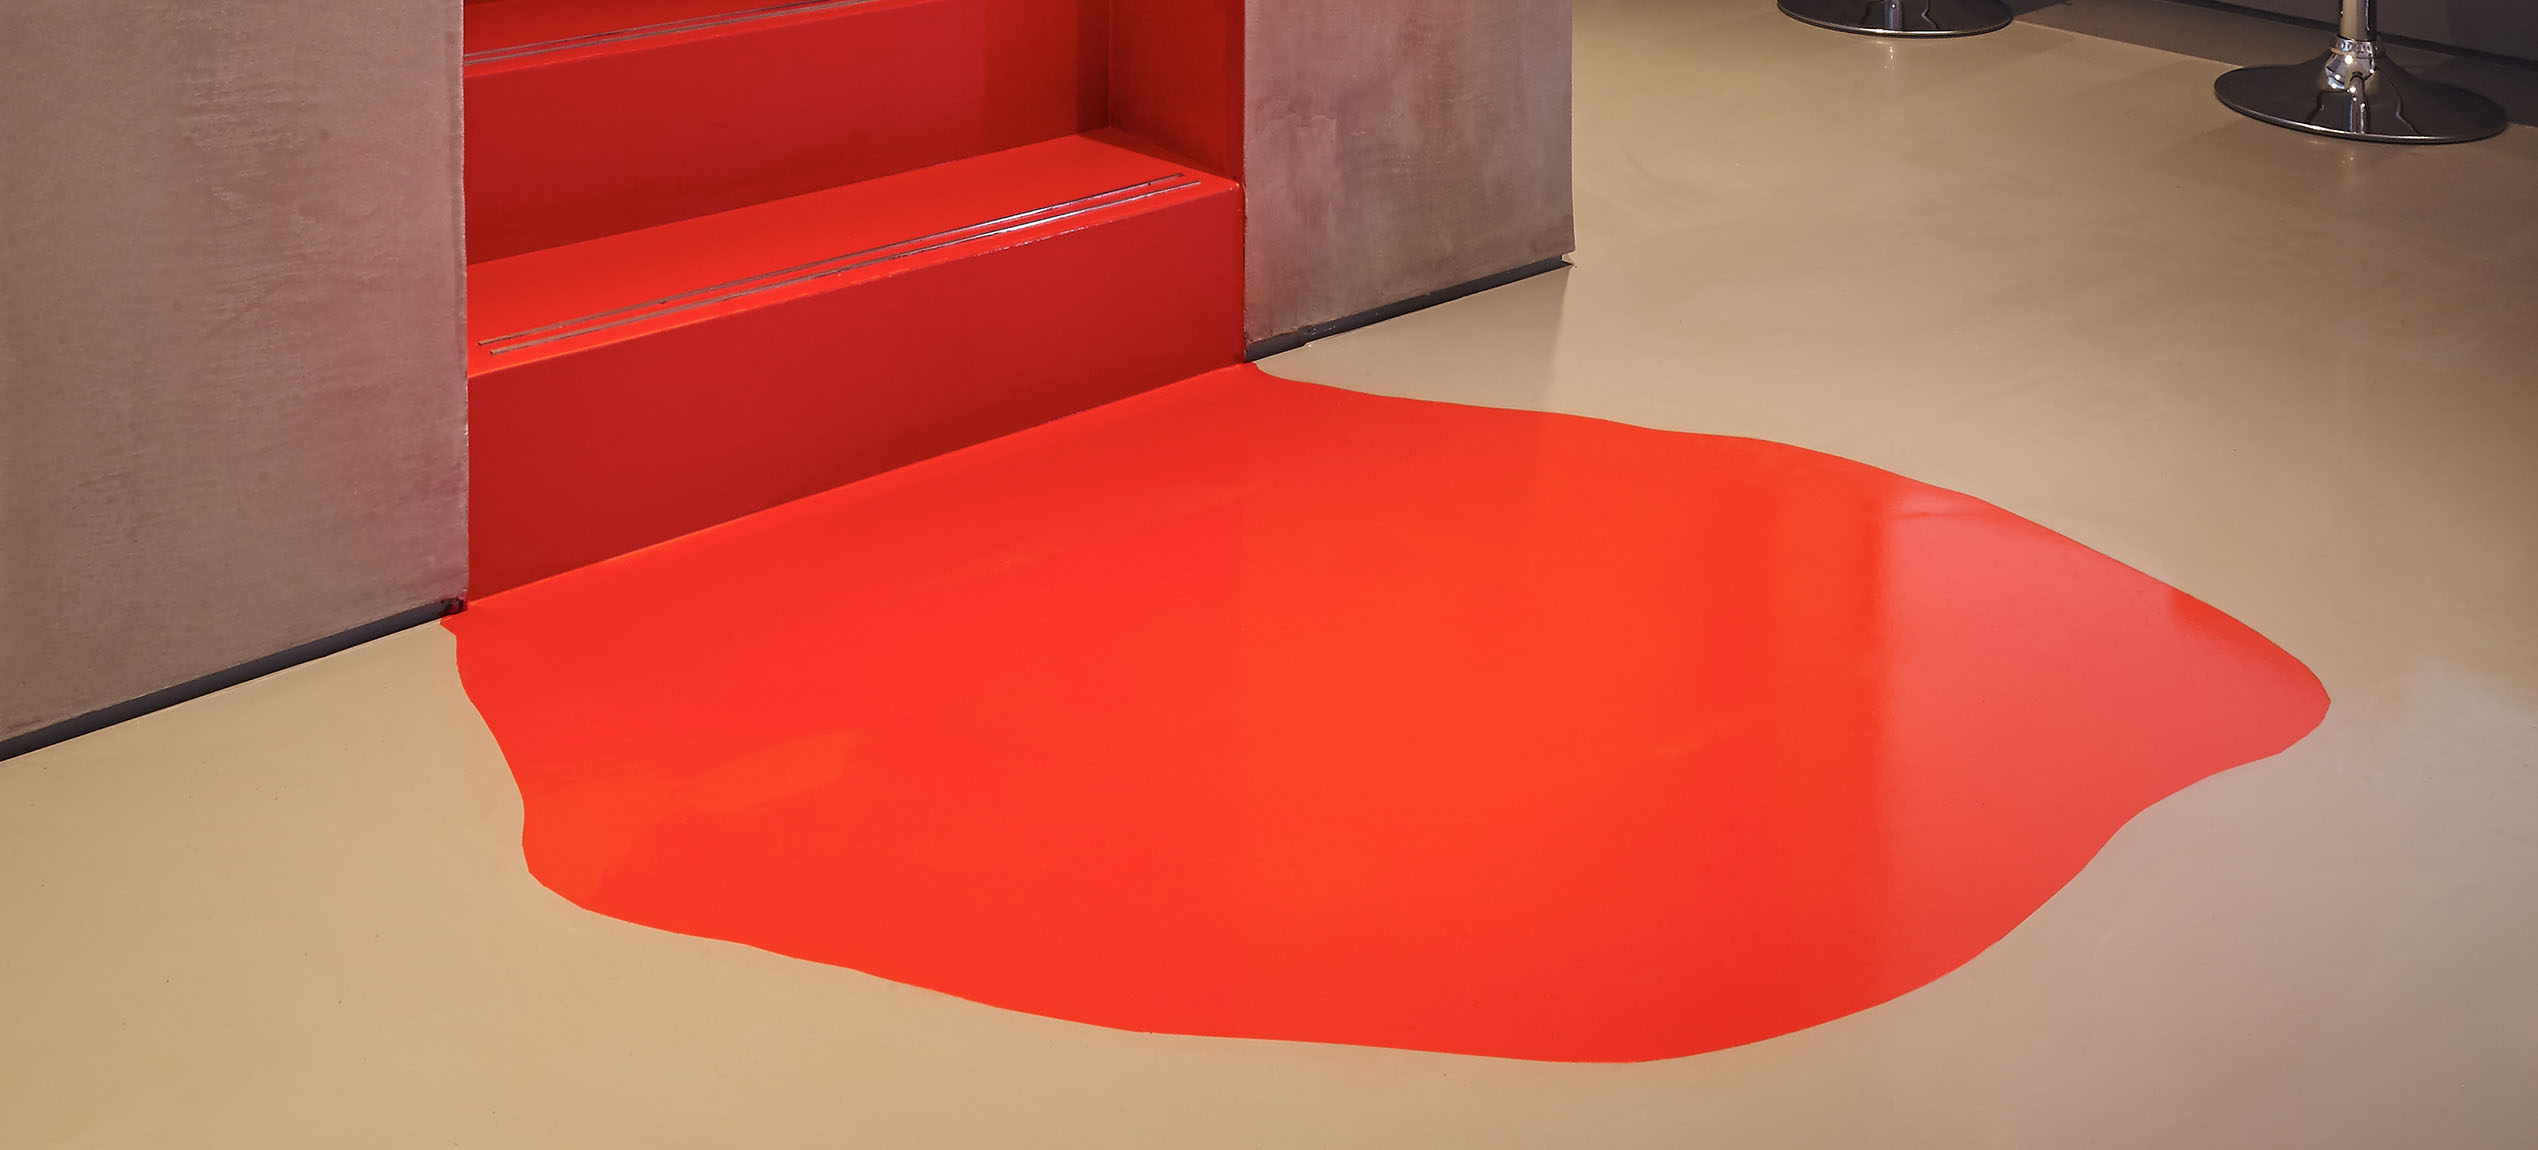 poured resin floor for stairs 